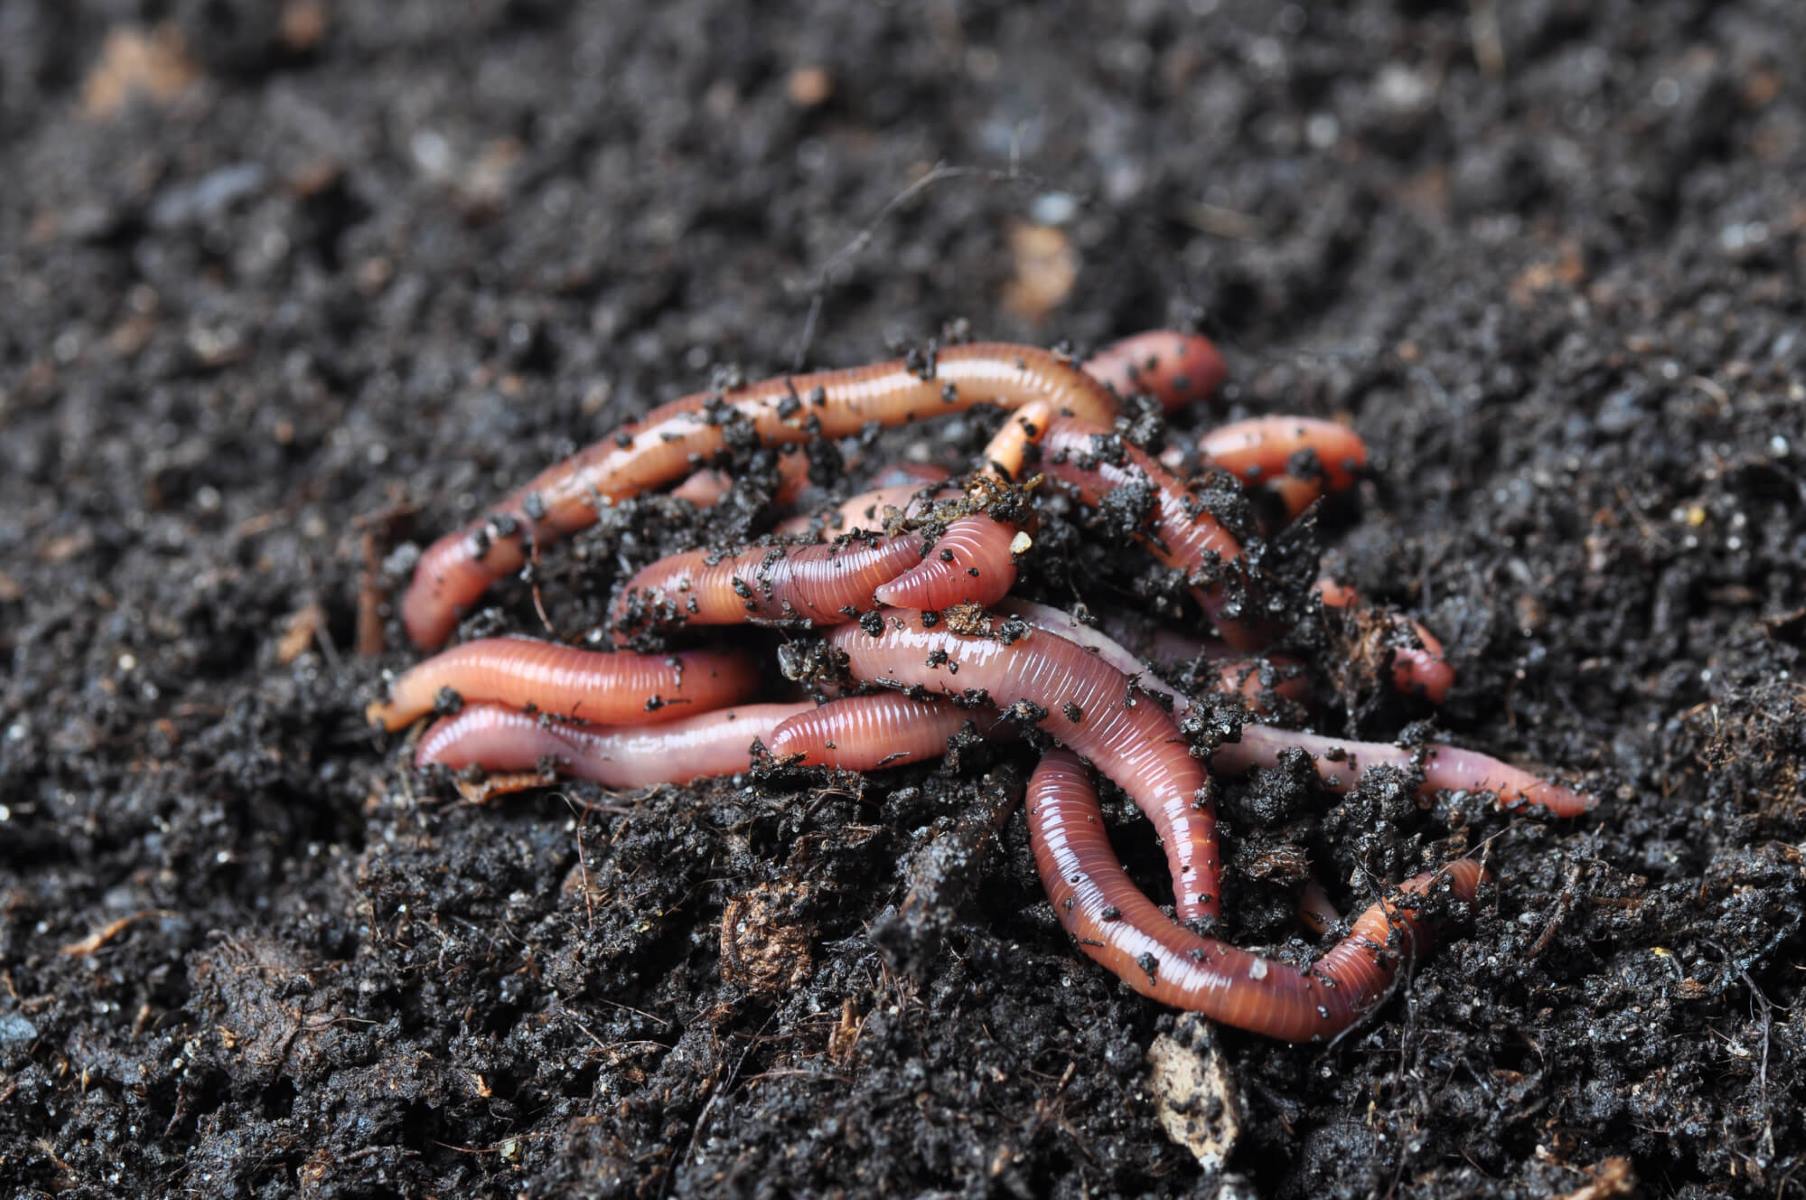 How To Store Worm Castings